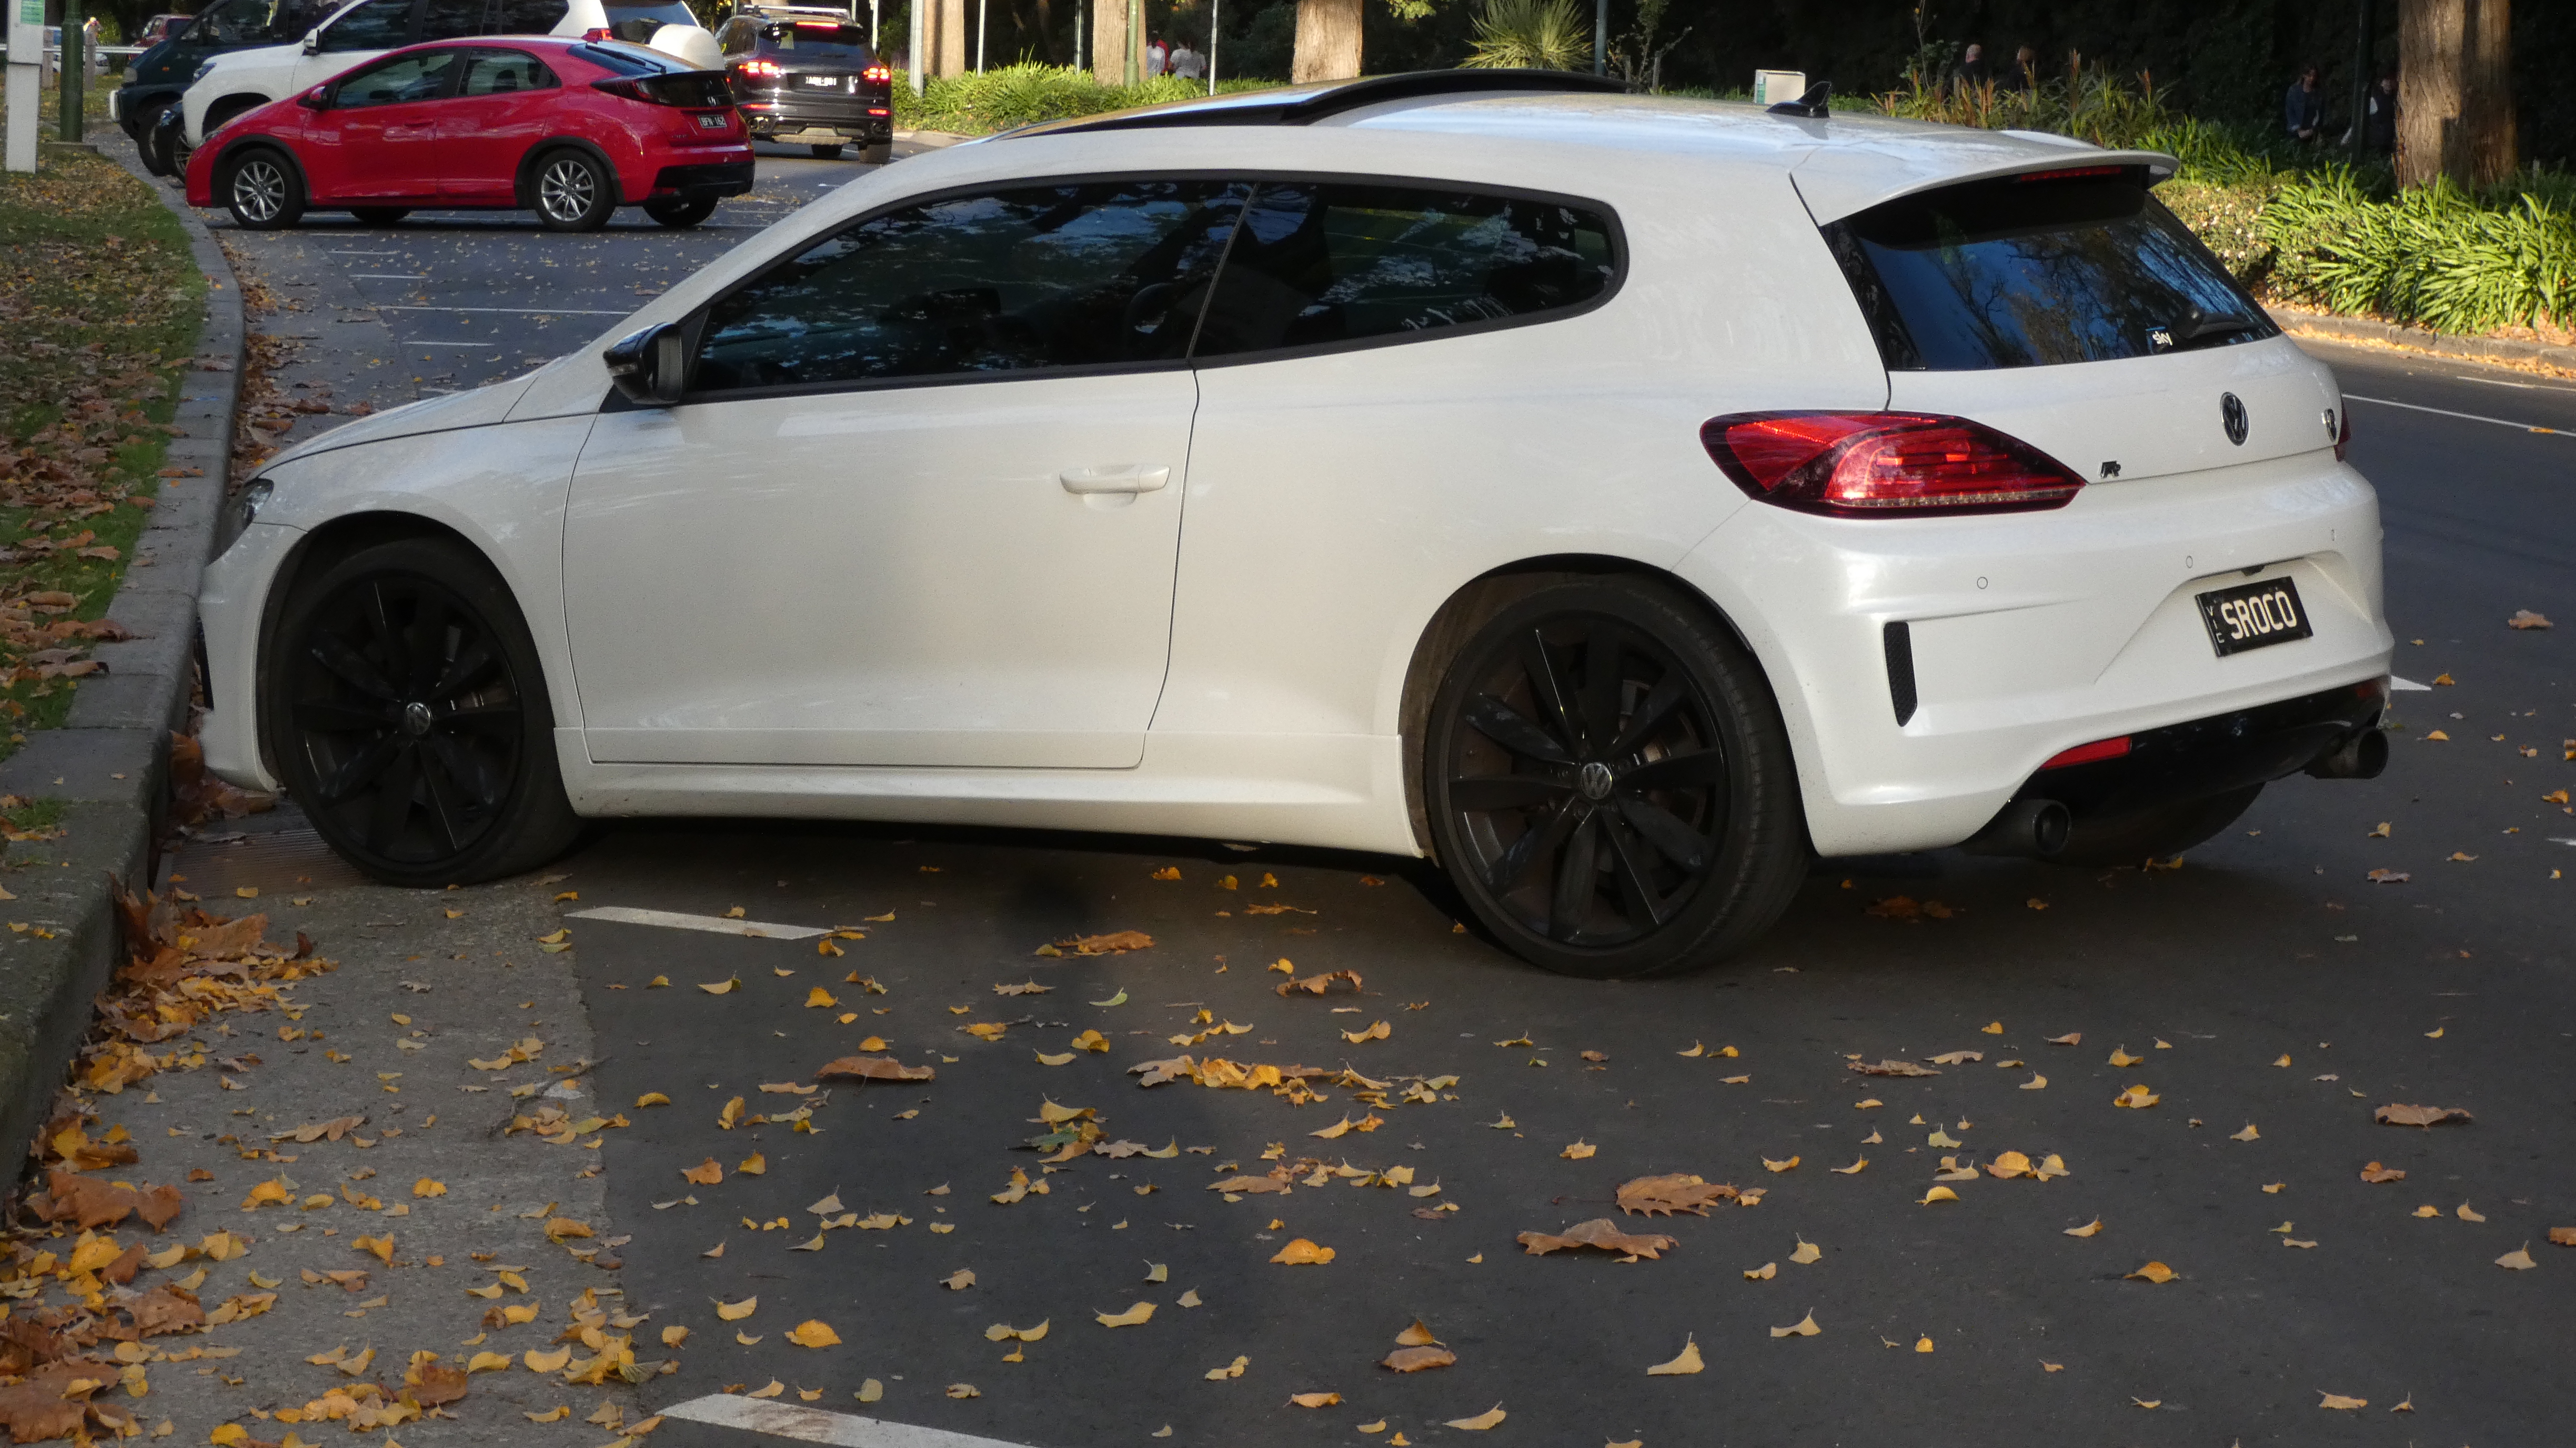 Categoría Litoral mineral 2016 Volkswagen Scirocco R Wolfsburg Edition: owner review - Drive